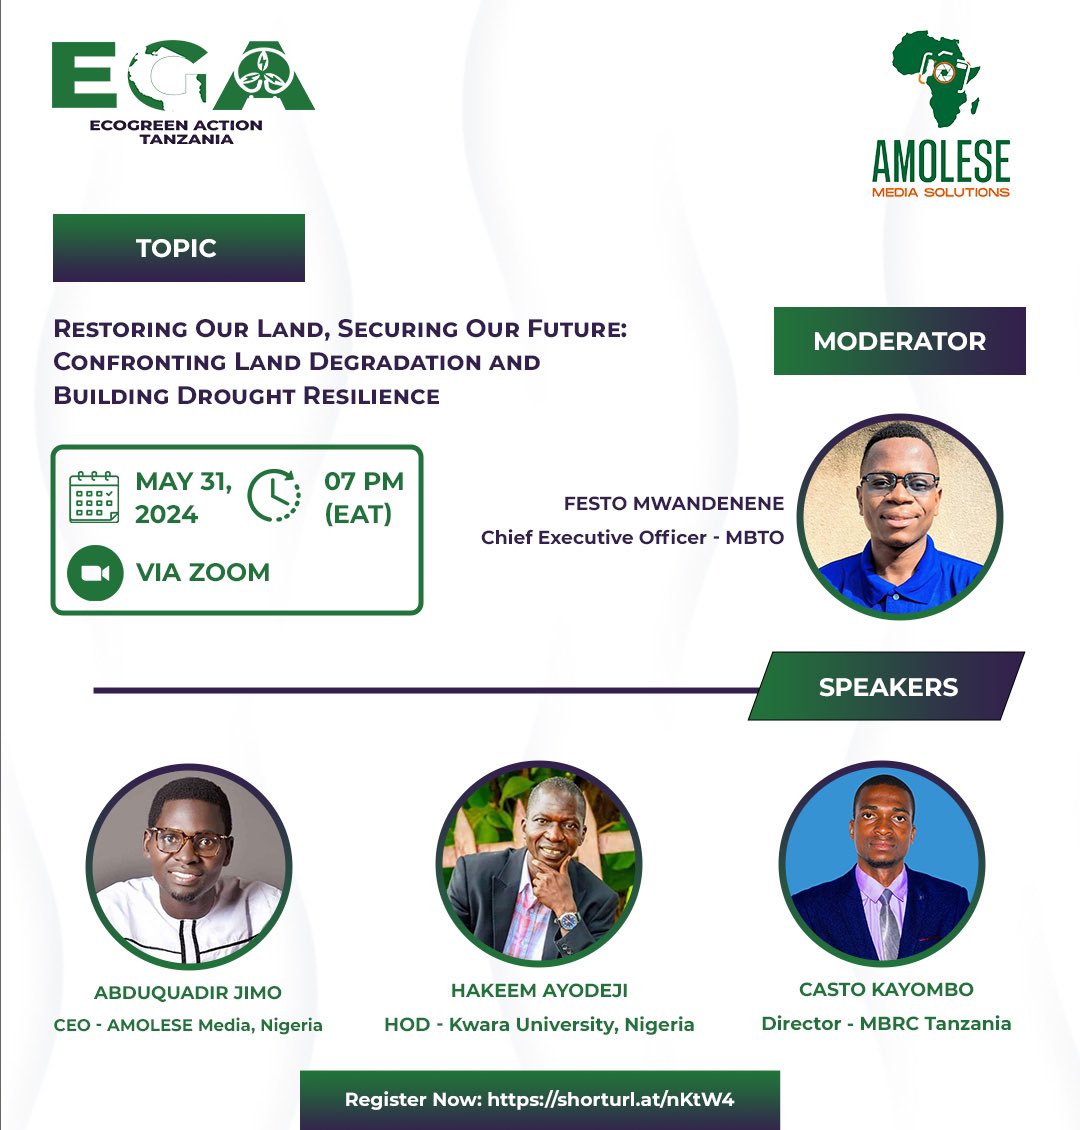 Don't miss out!!! Register in Advance to secure your spot. 👉🏾 [shorturl.at/nKtW4] 🗓️ Date: 31st May ⏰ Time: 07:00 pm EAT You’re Welcome!!! @jimoh_iyanda @SheilaKhama @AbiluTangwa @Greenisamissio1 @ACCAIAFRICA @BojanaBogojevic @nzasap3 @EmaanzT @EarthKeeper22